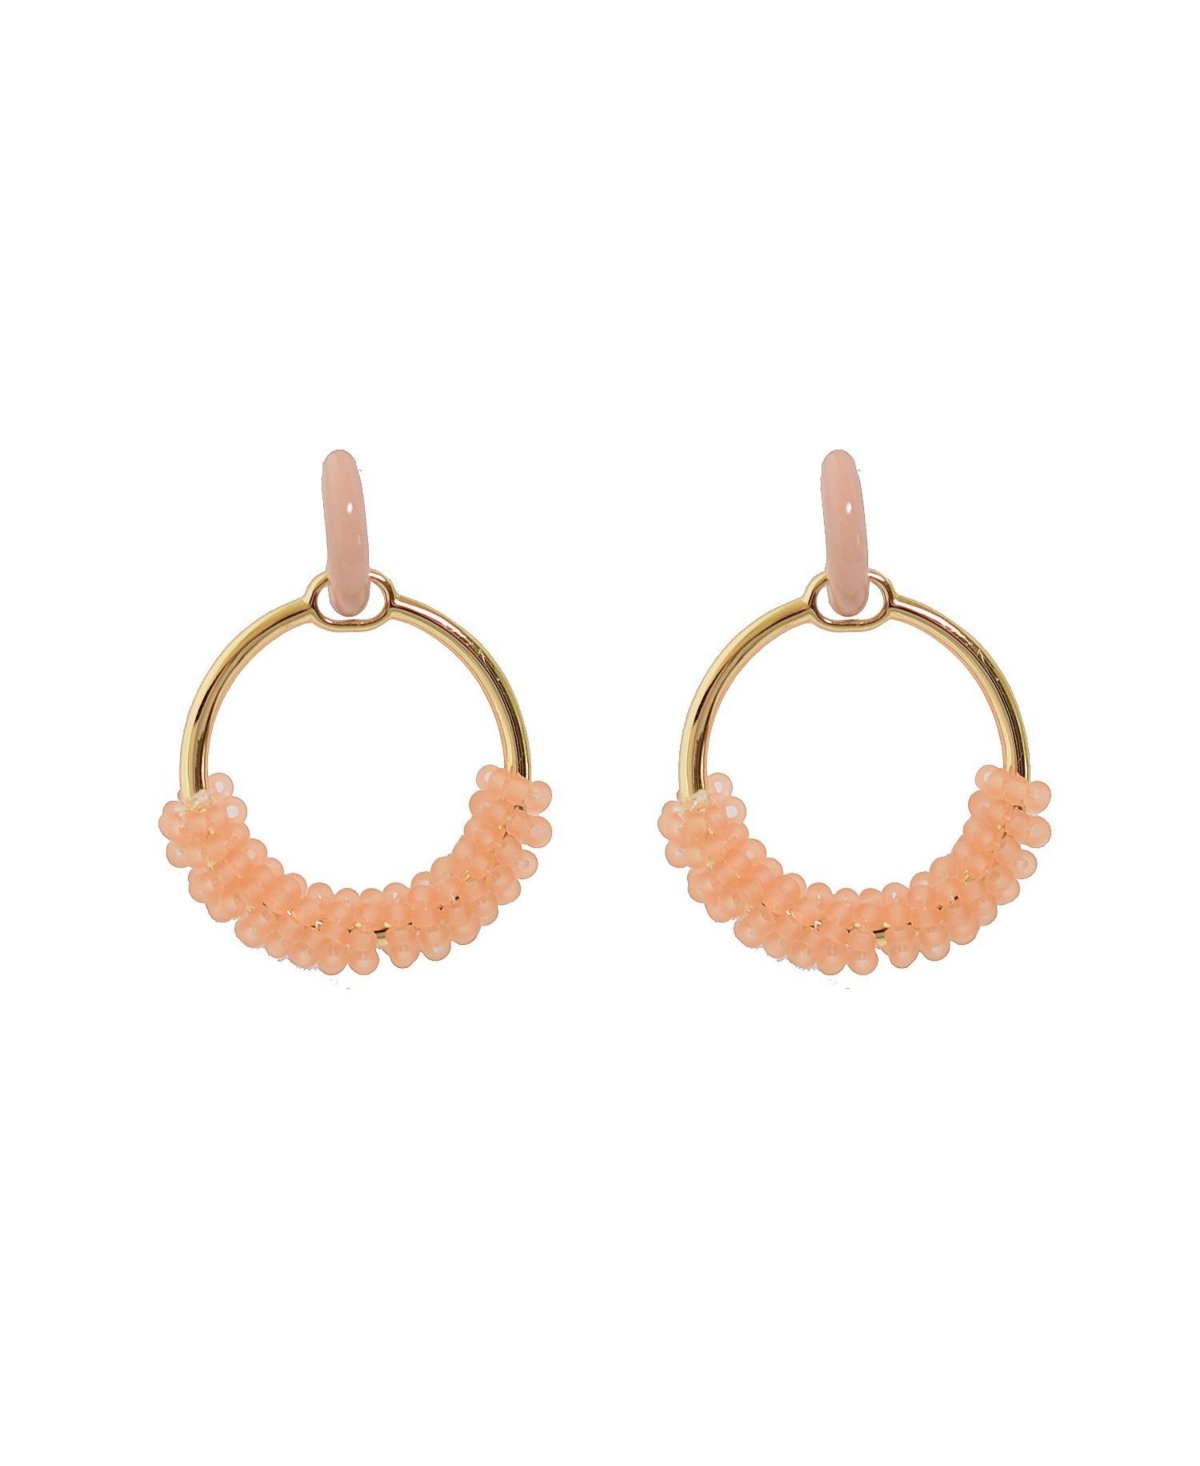 Pink Seedbead Wrapped Ring Earrings - Gold